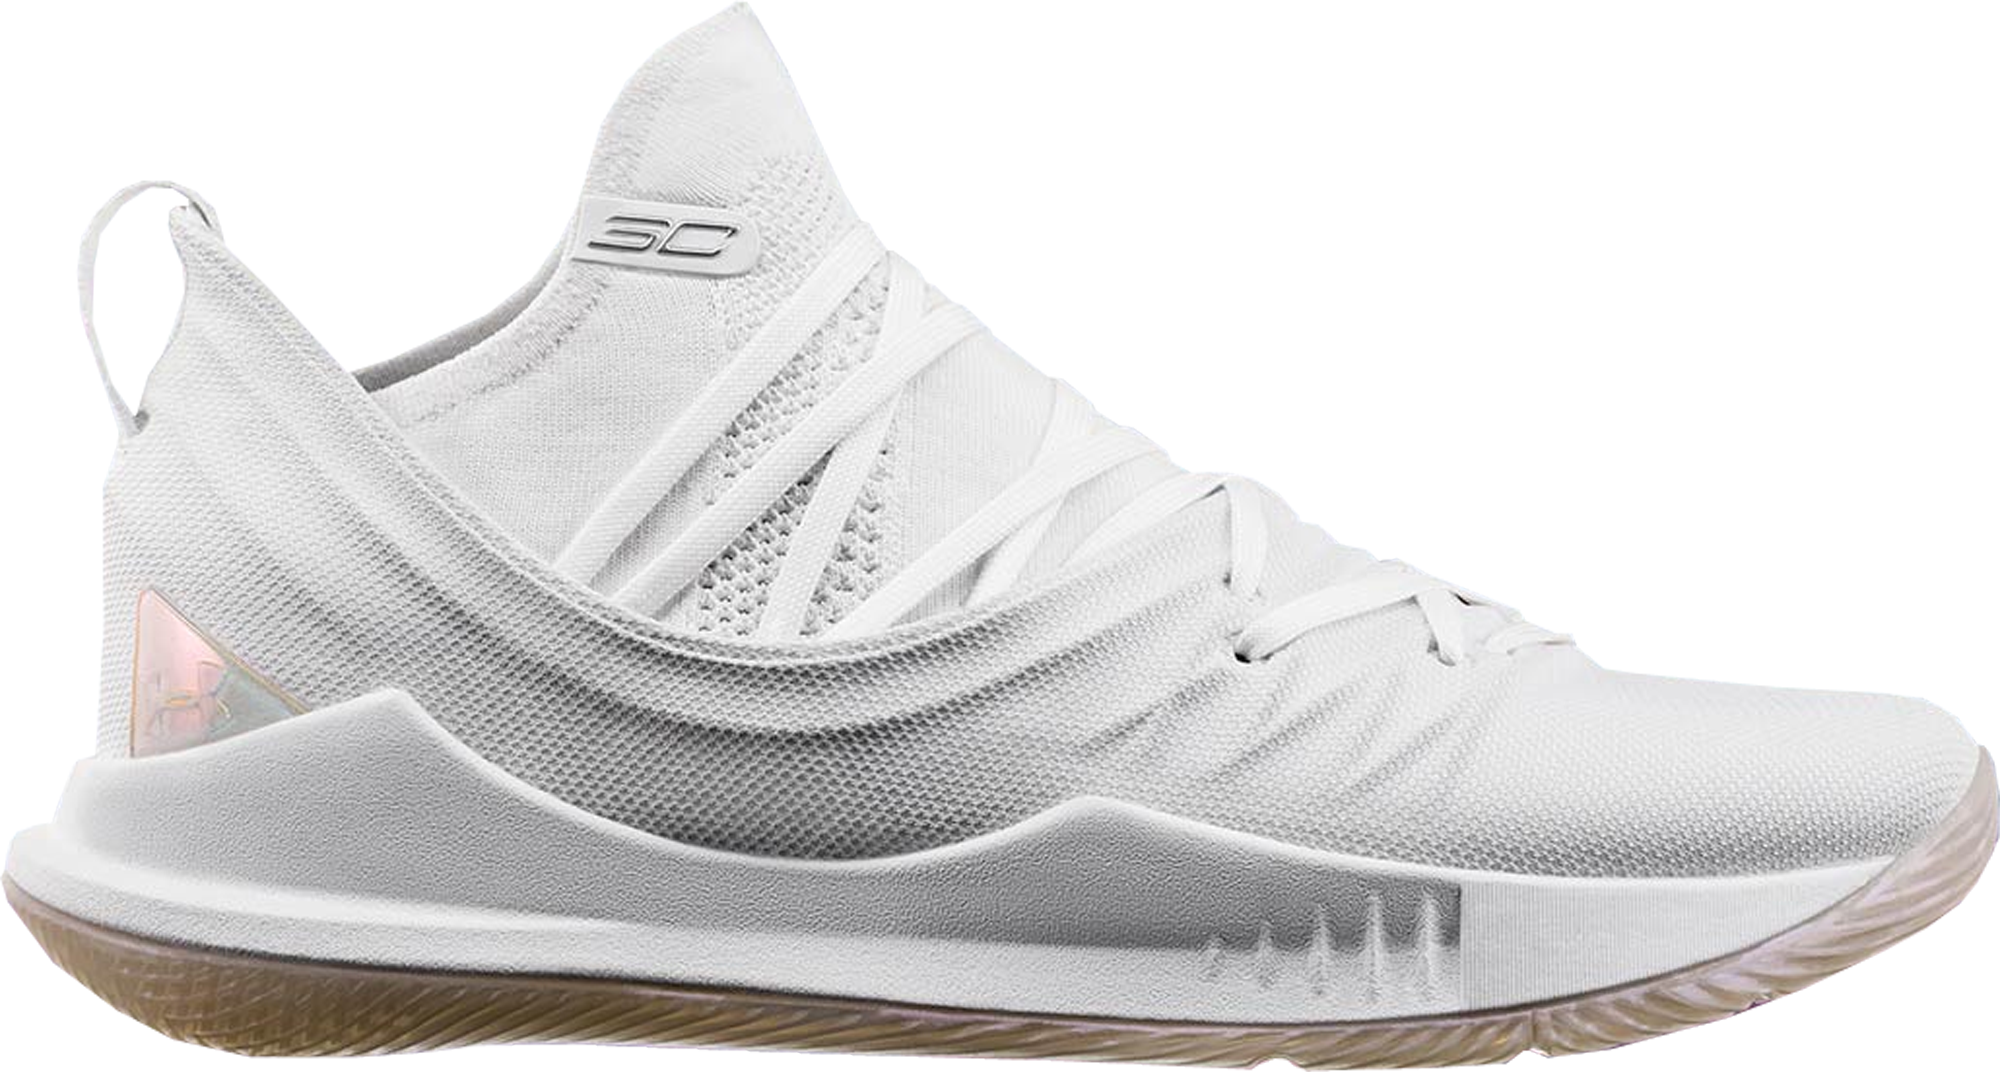 Under Armour Curry 5 White - Sneakers